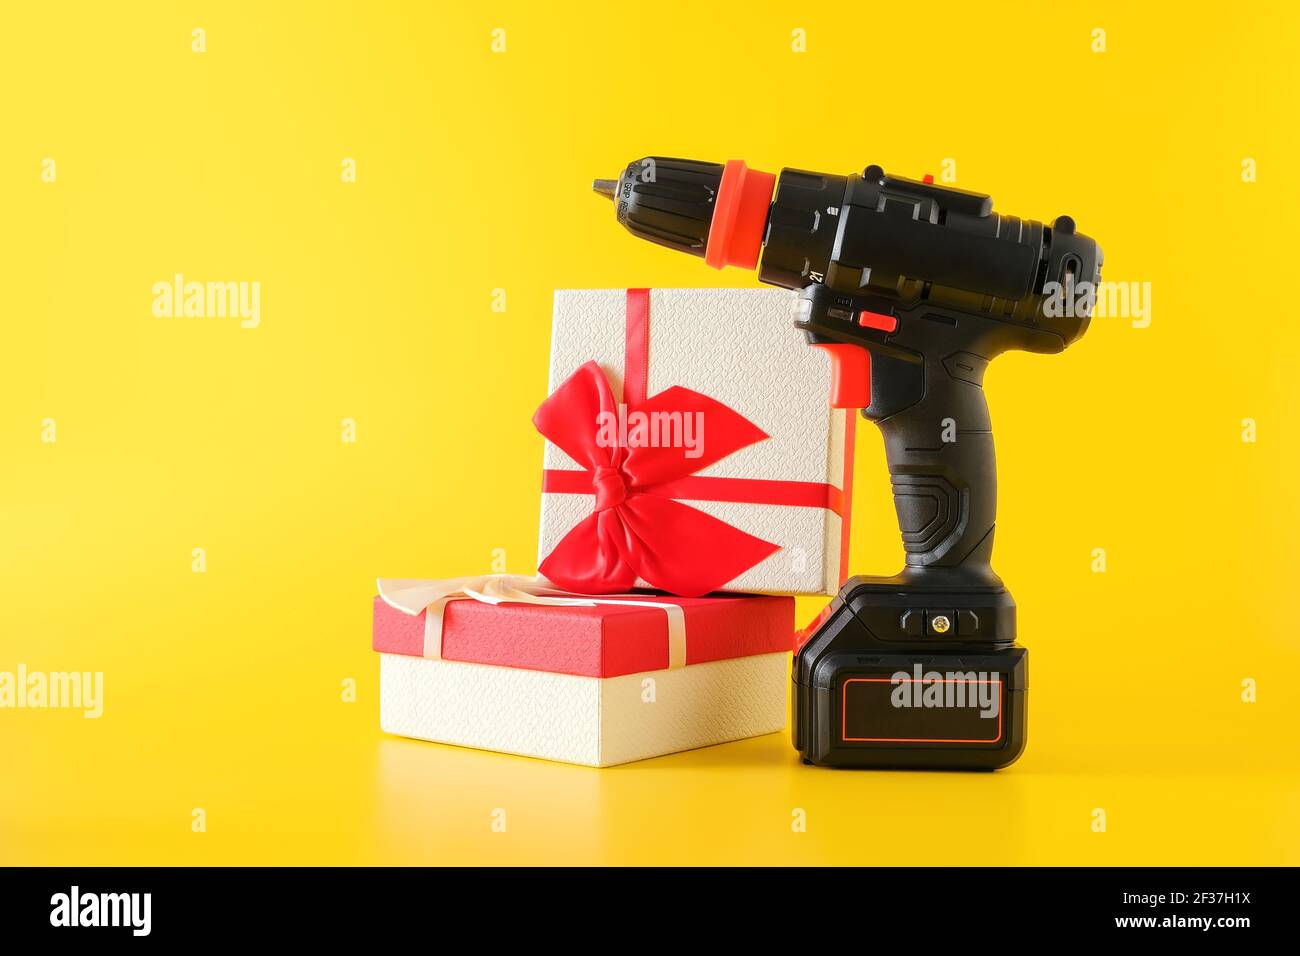 https://c8.alamy.com/comp/2F37H1X/handheld-cordless-power-drill-and-gift-boxes-on-yellow-background-2F37H1X.jpg